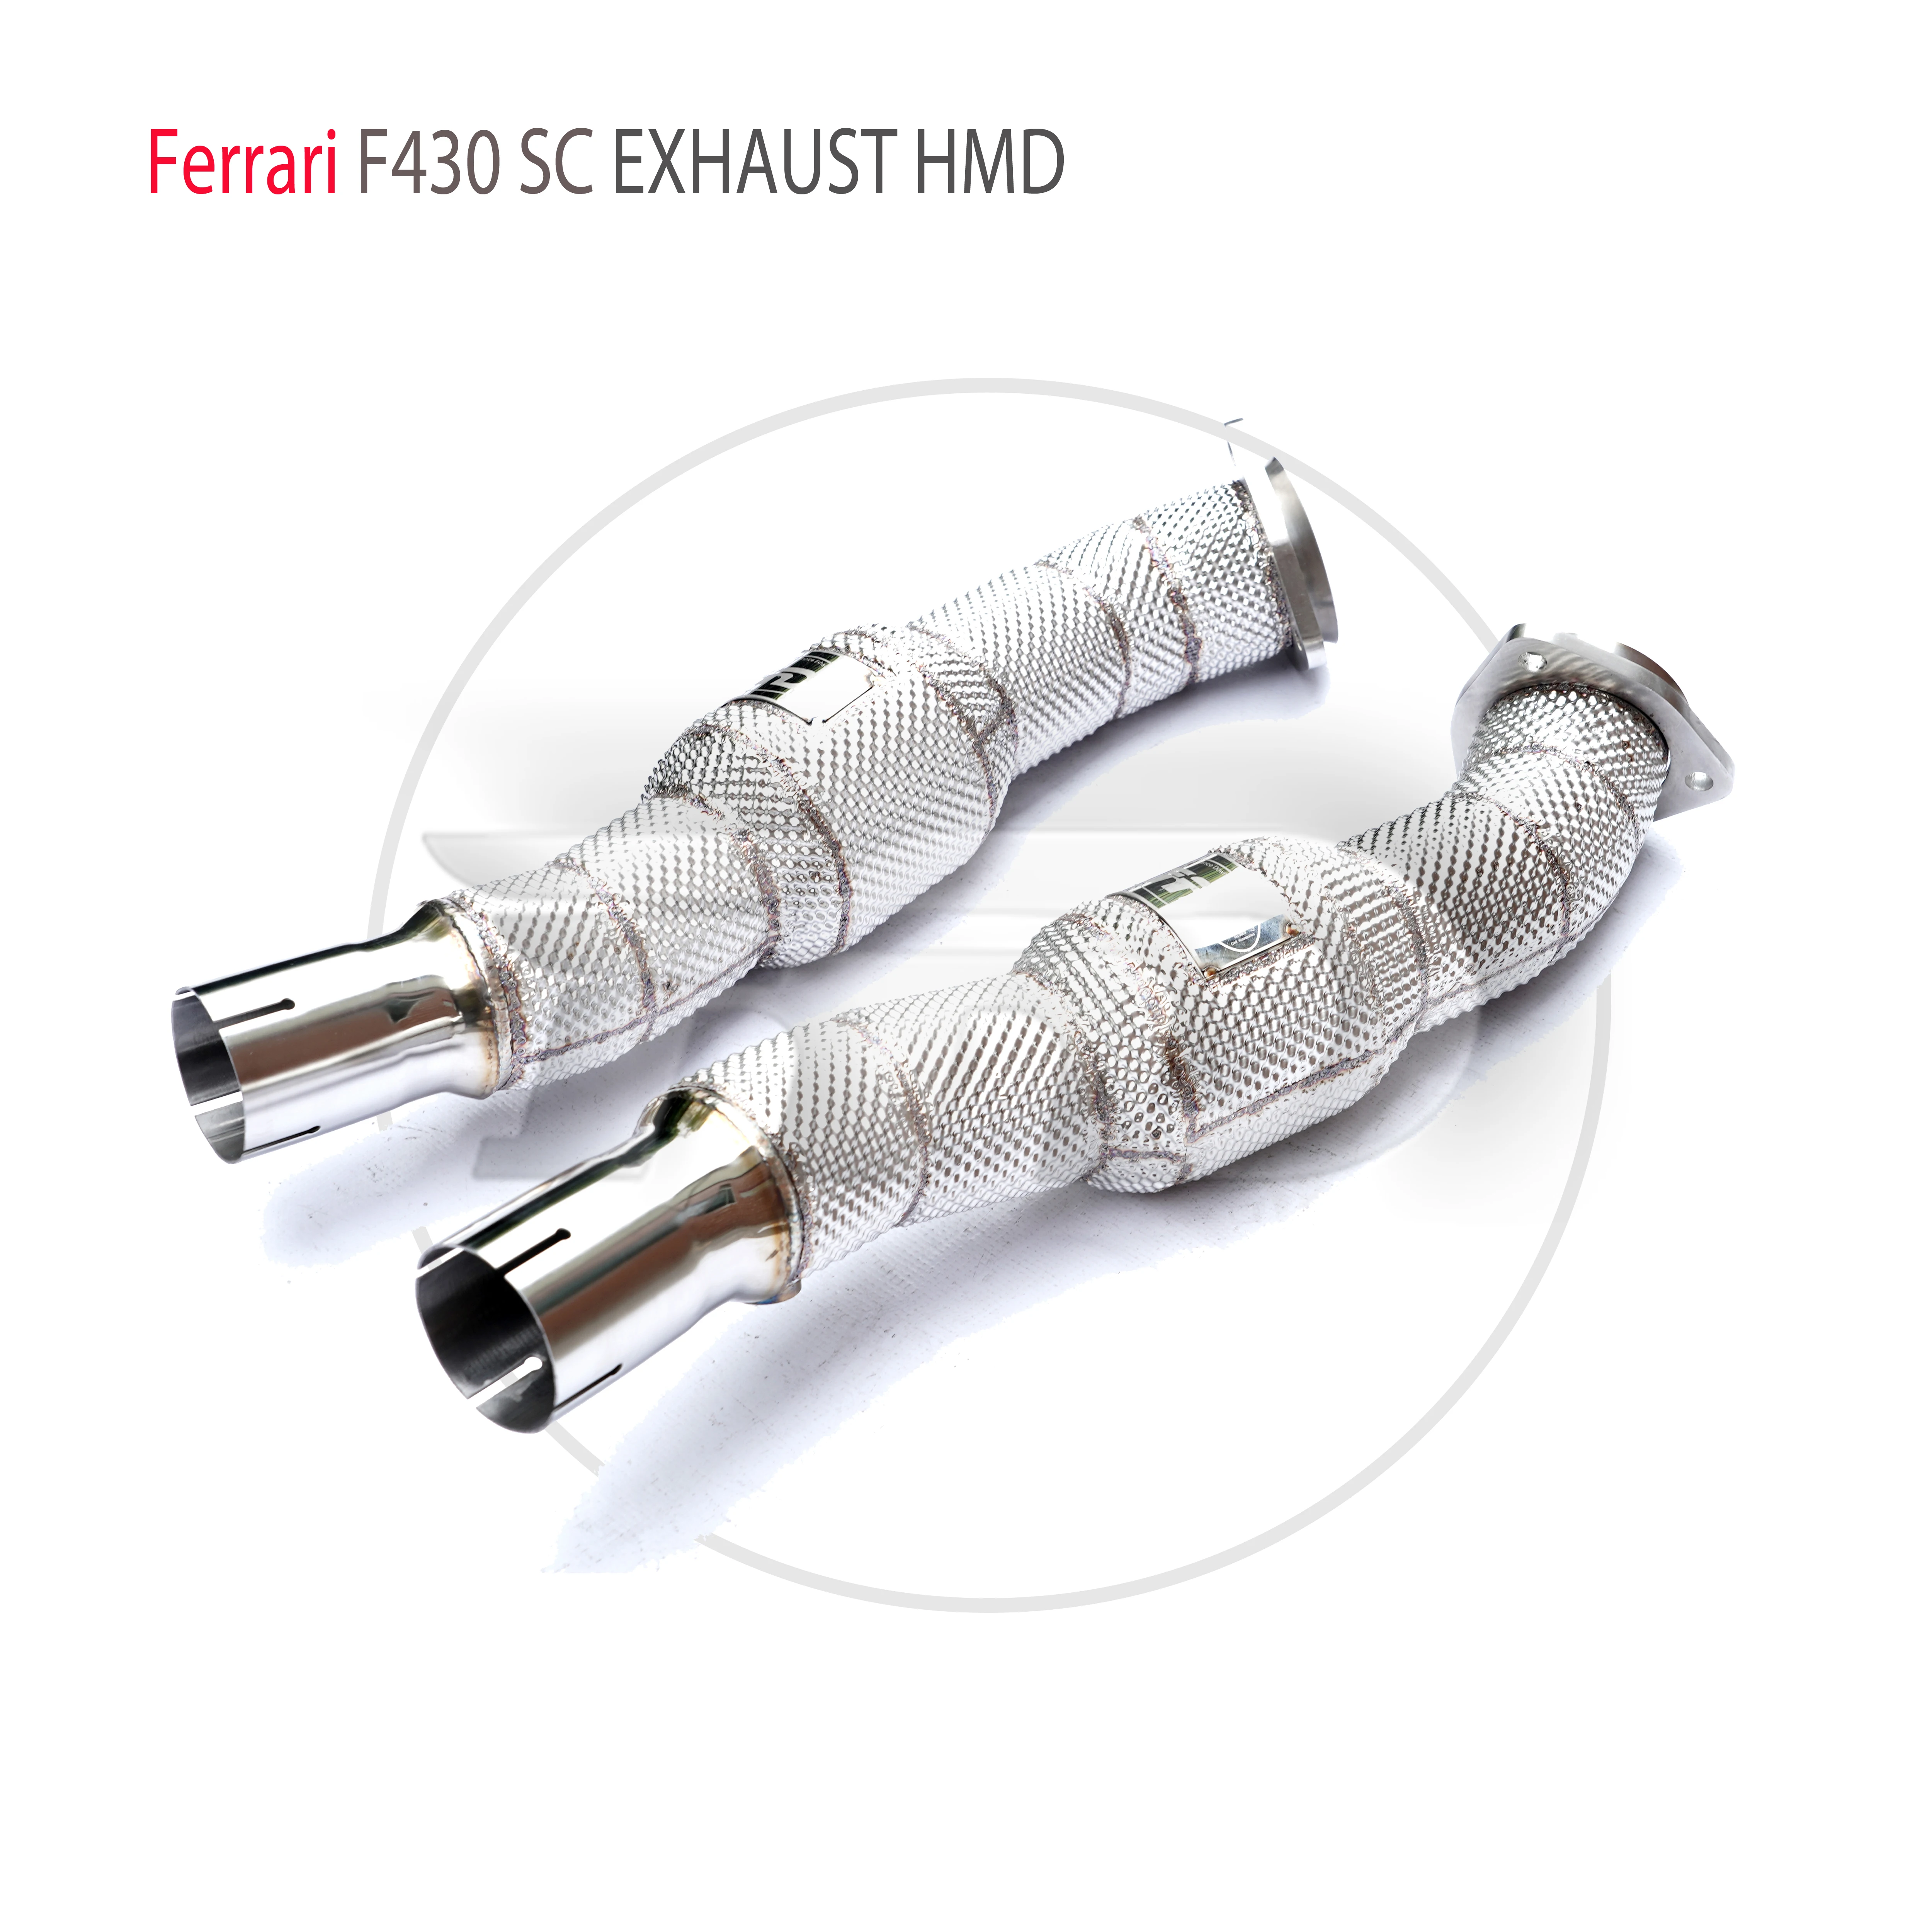 

HMD Exhaust Manifold Downpipe for Ferrari F430 Scuderia Coupe Car Accessories With Catalytic Converter Header Without Cat Pipe